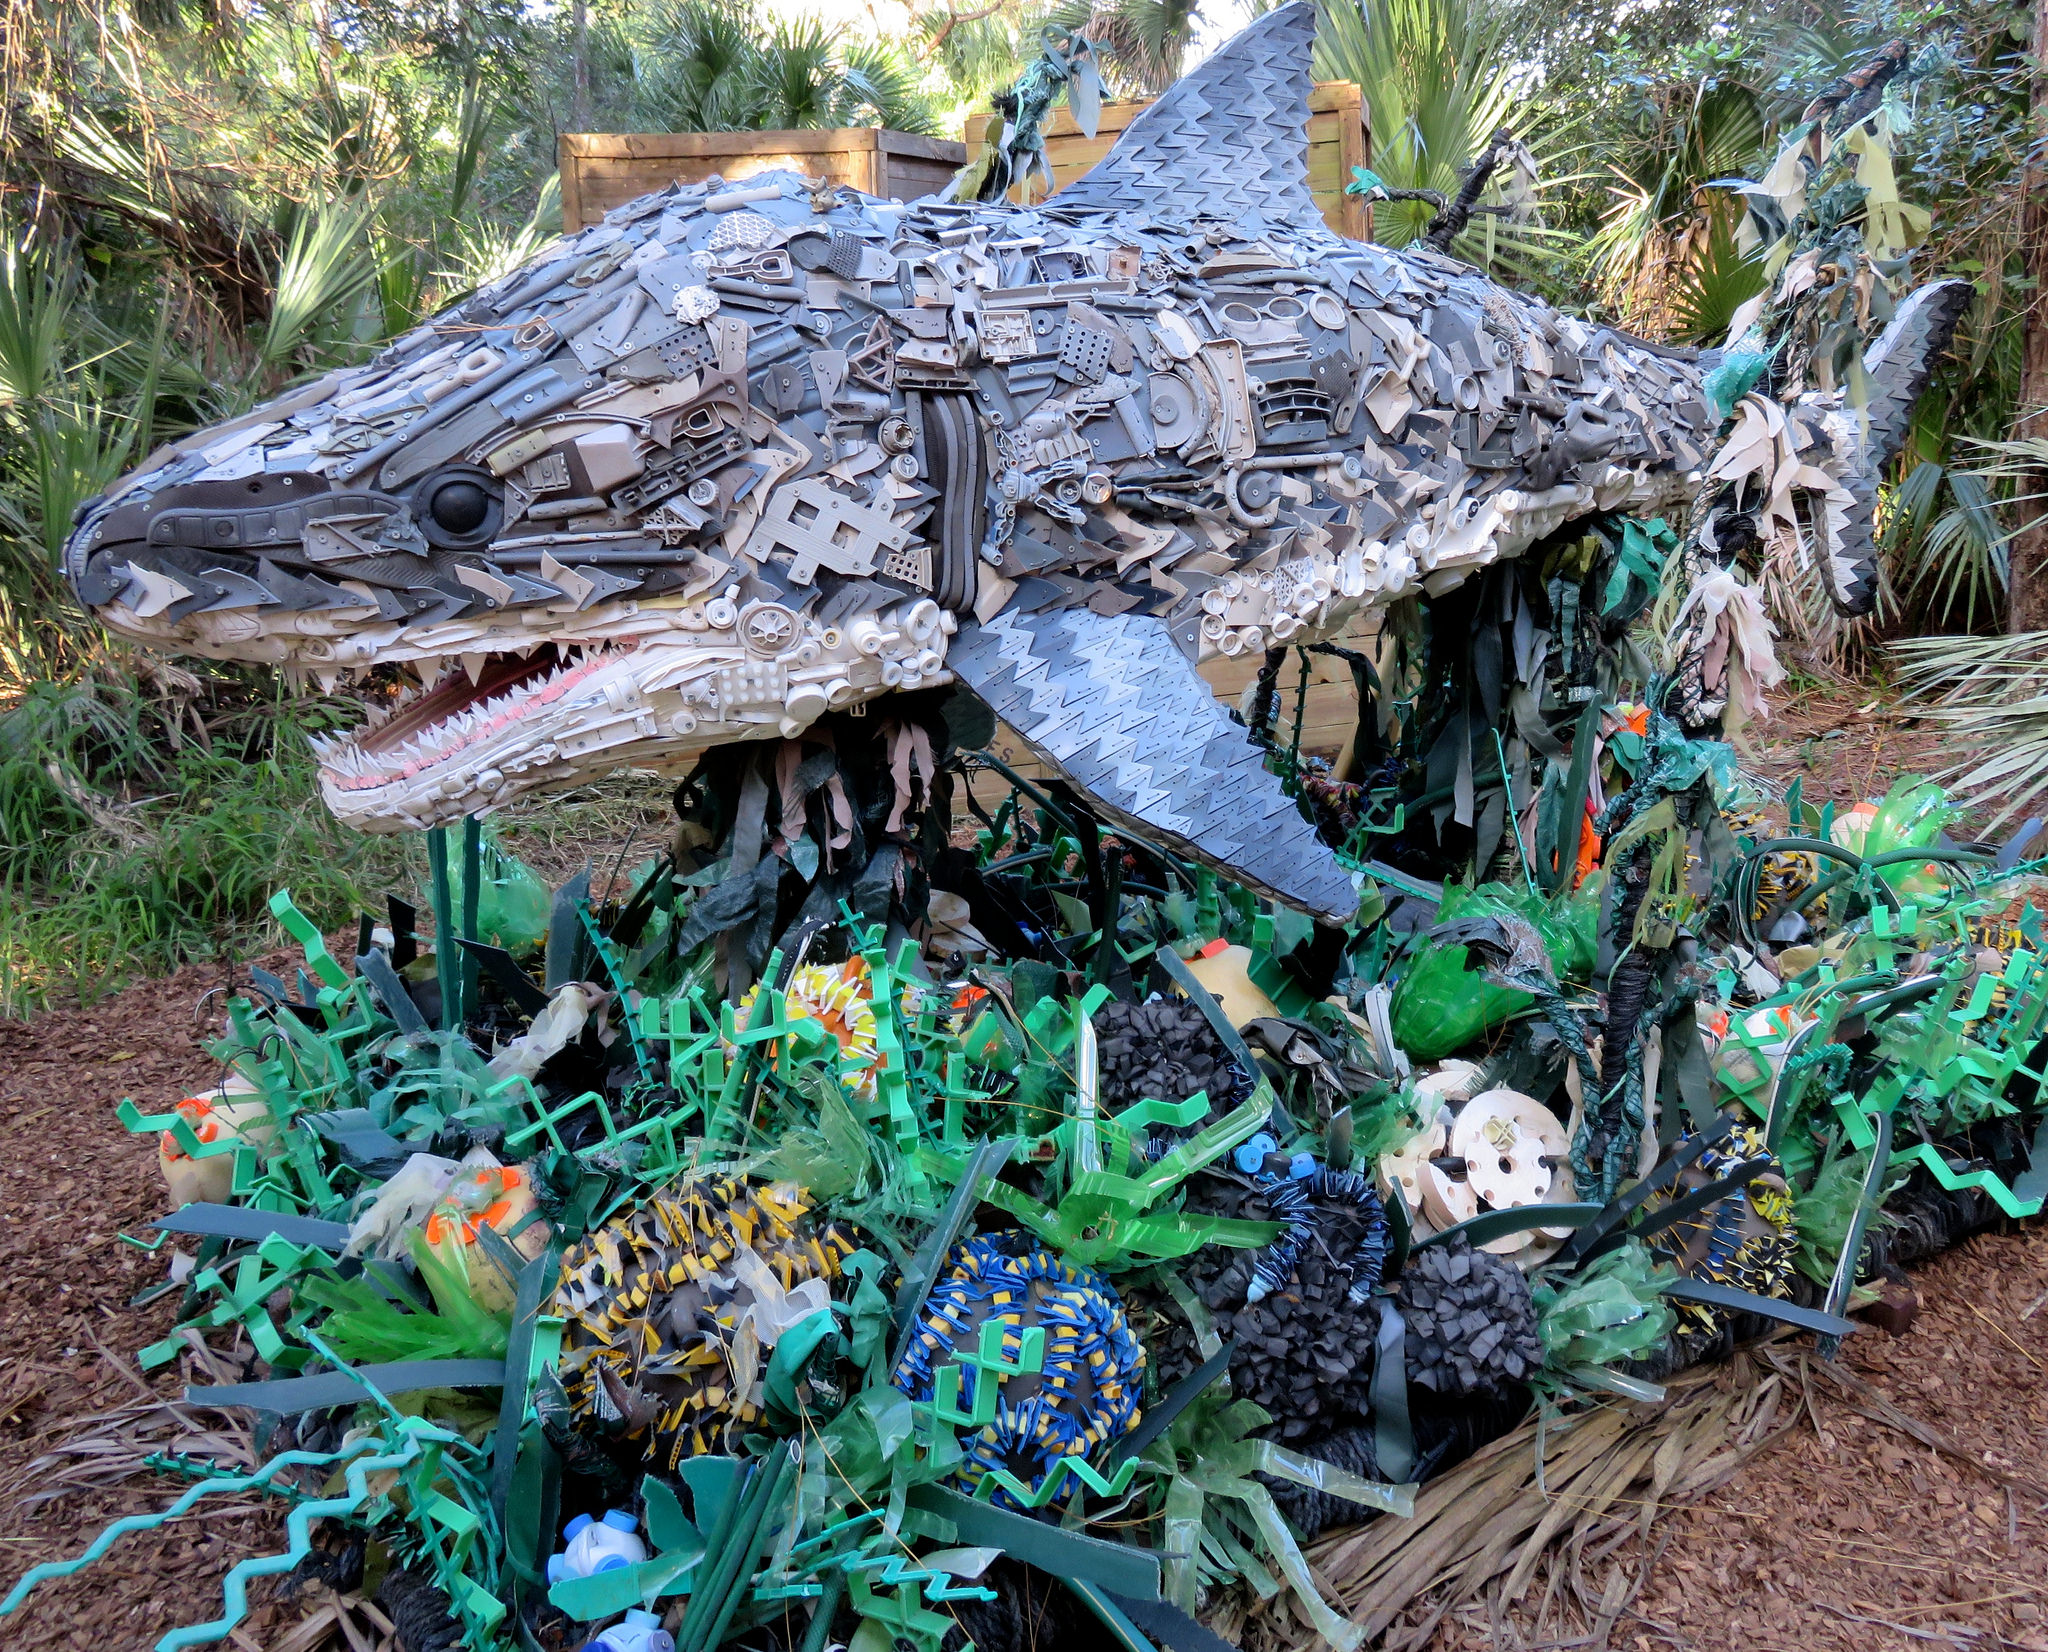 The Smithsonian's National Zoo —Washed Ashore: Art to Save the Sea" sculptures were made completely of plastic debris collected from beaches (Flickr) 